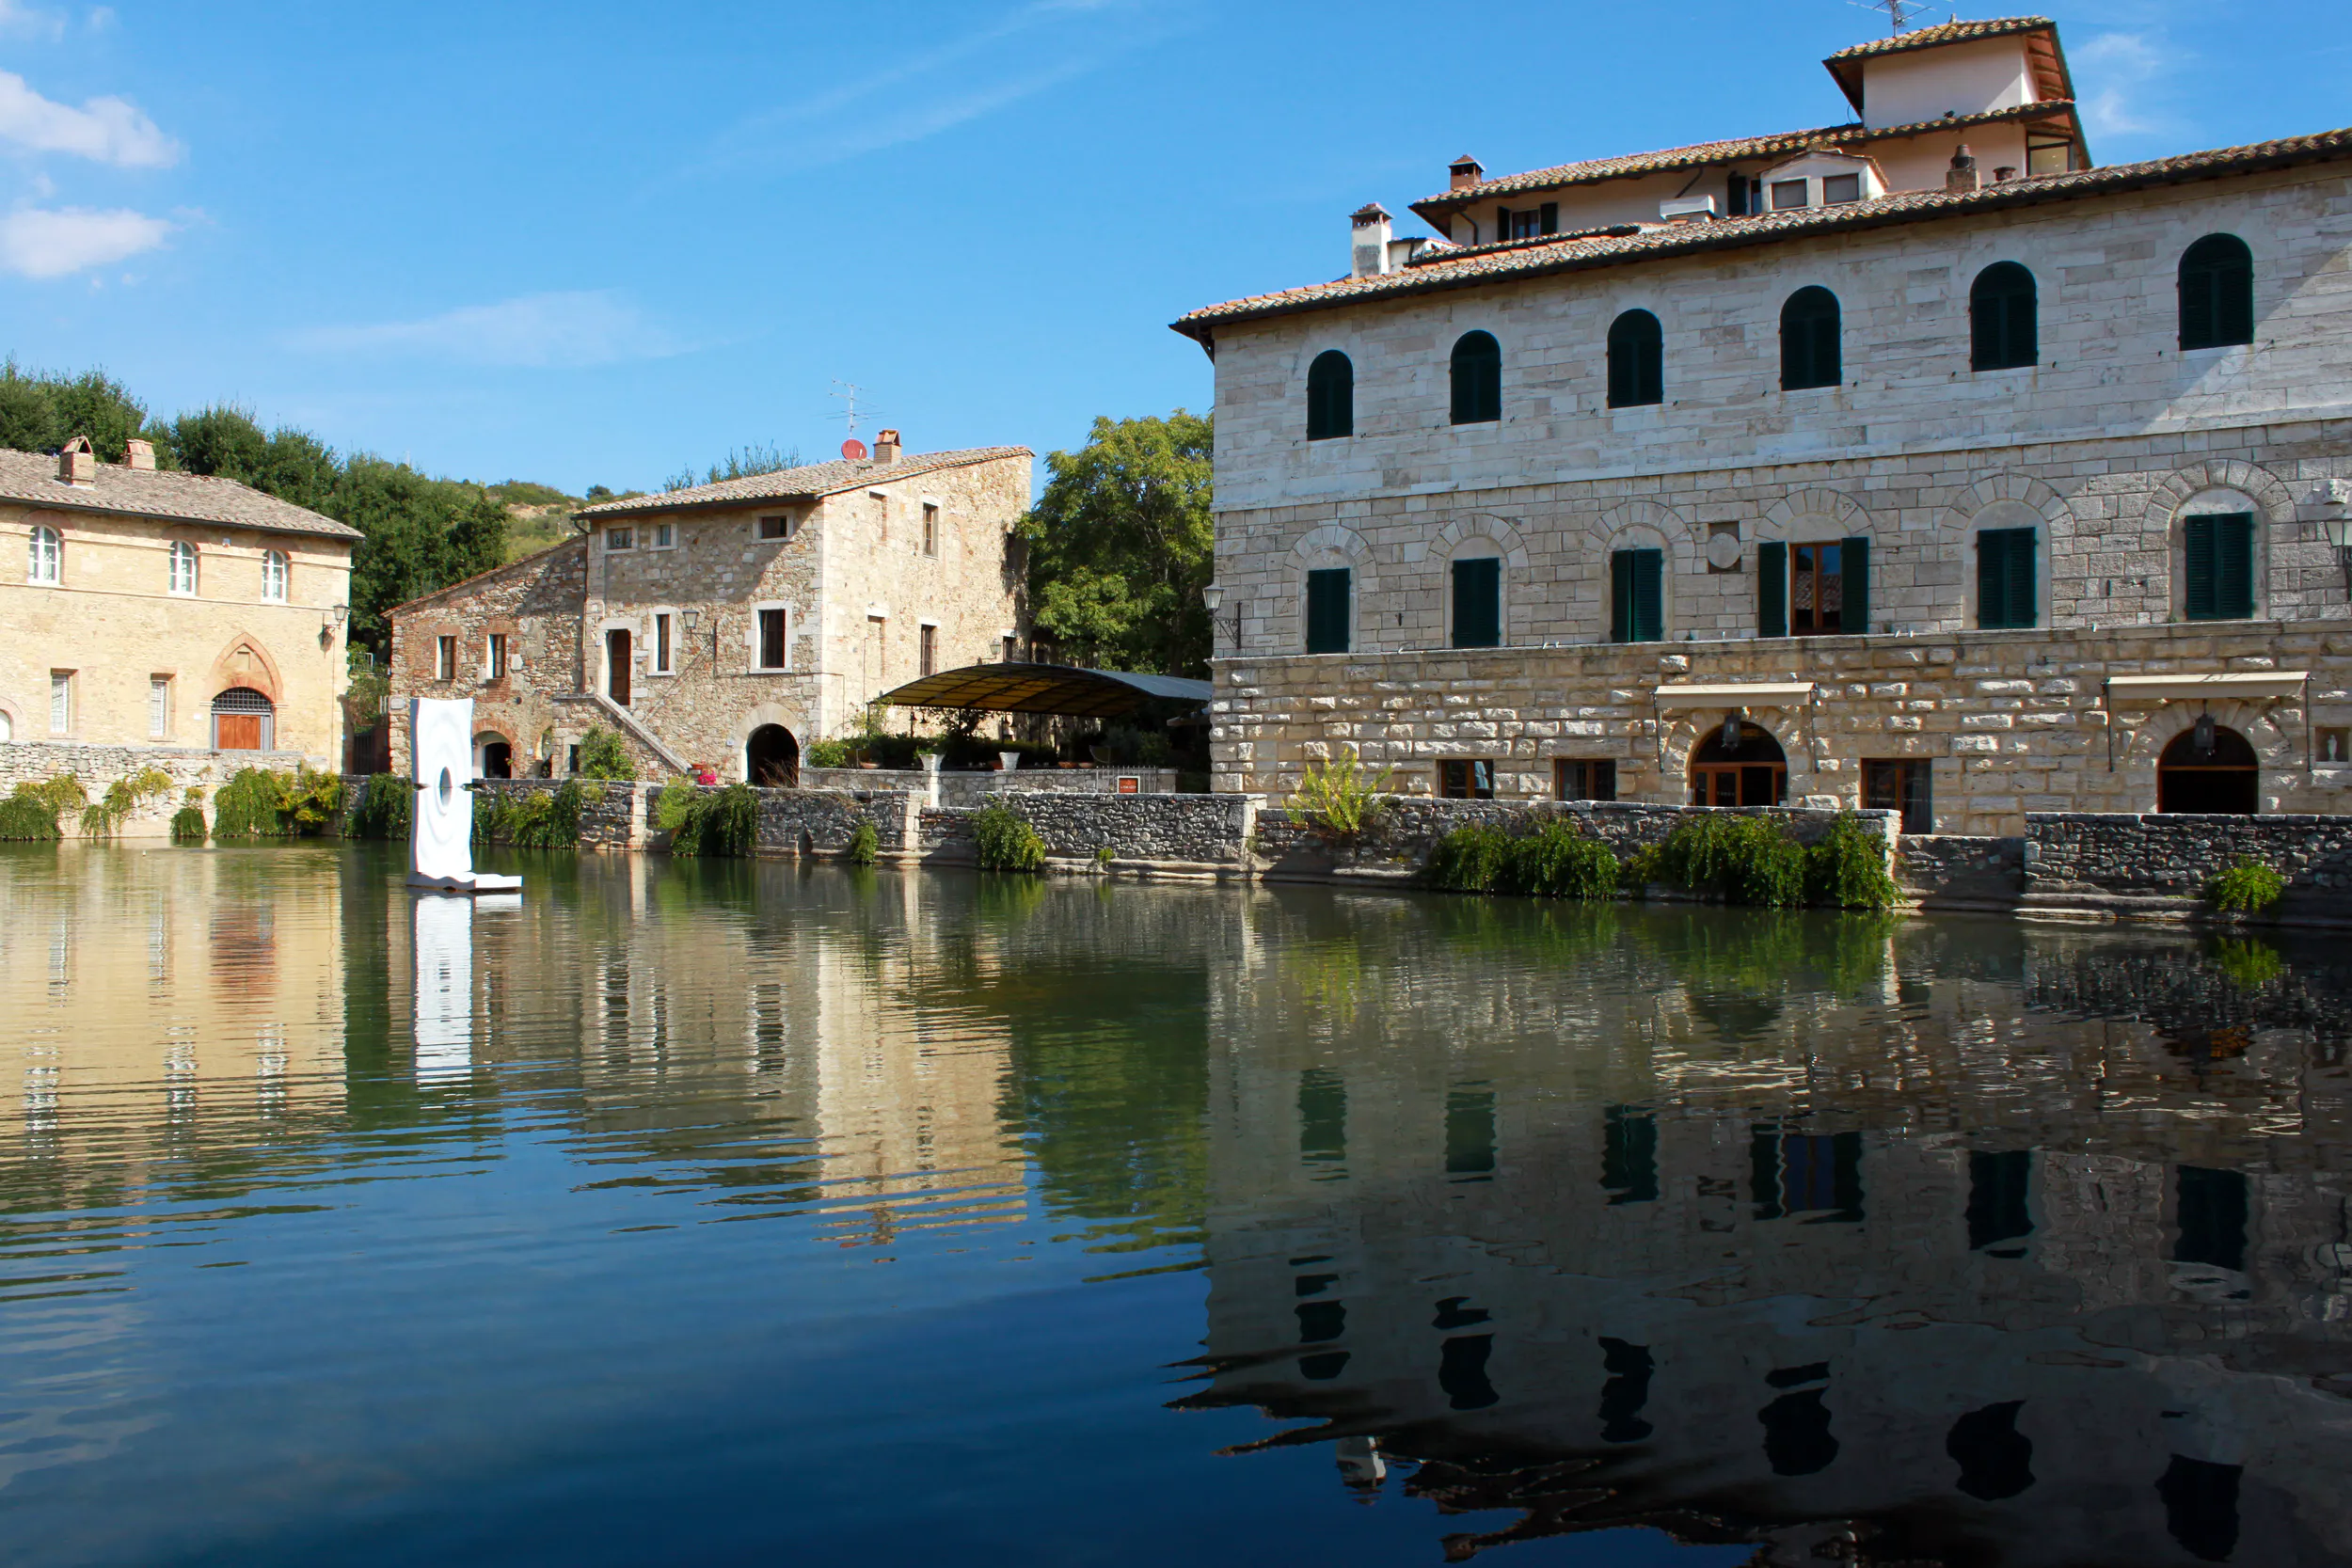 Bagno Vignoni, known for its hot sulfurous springs